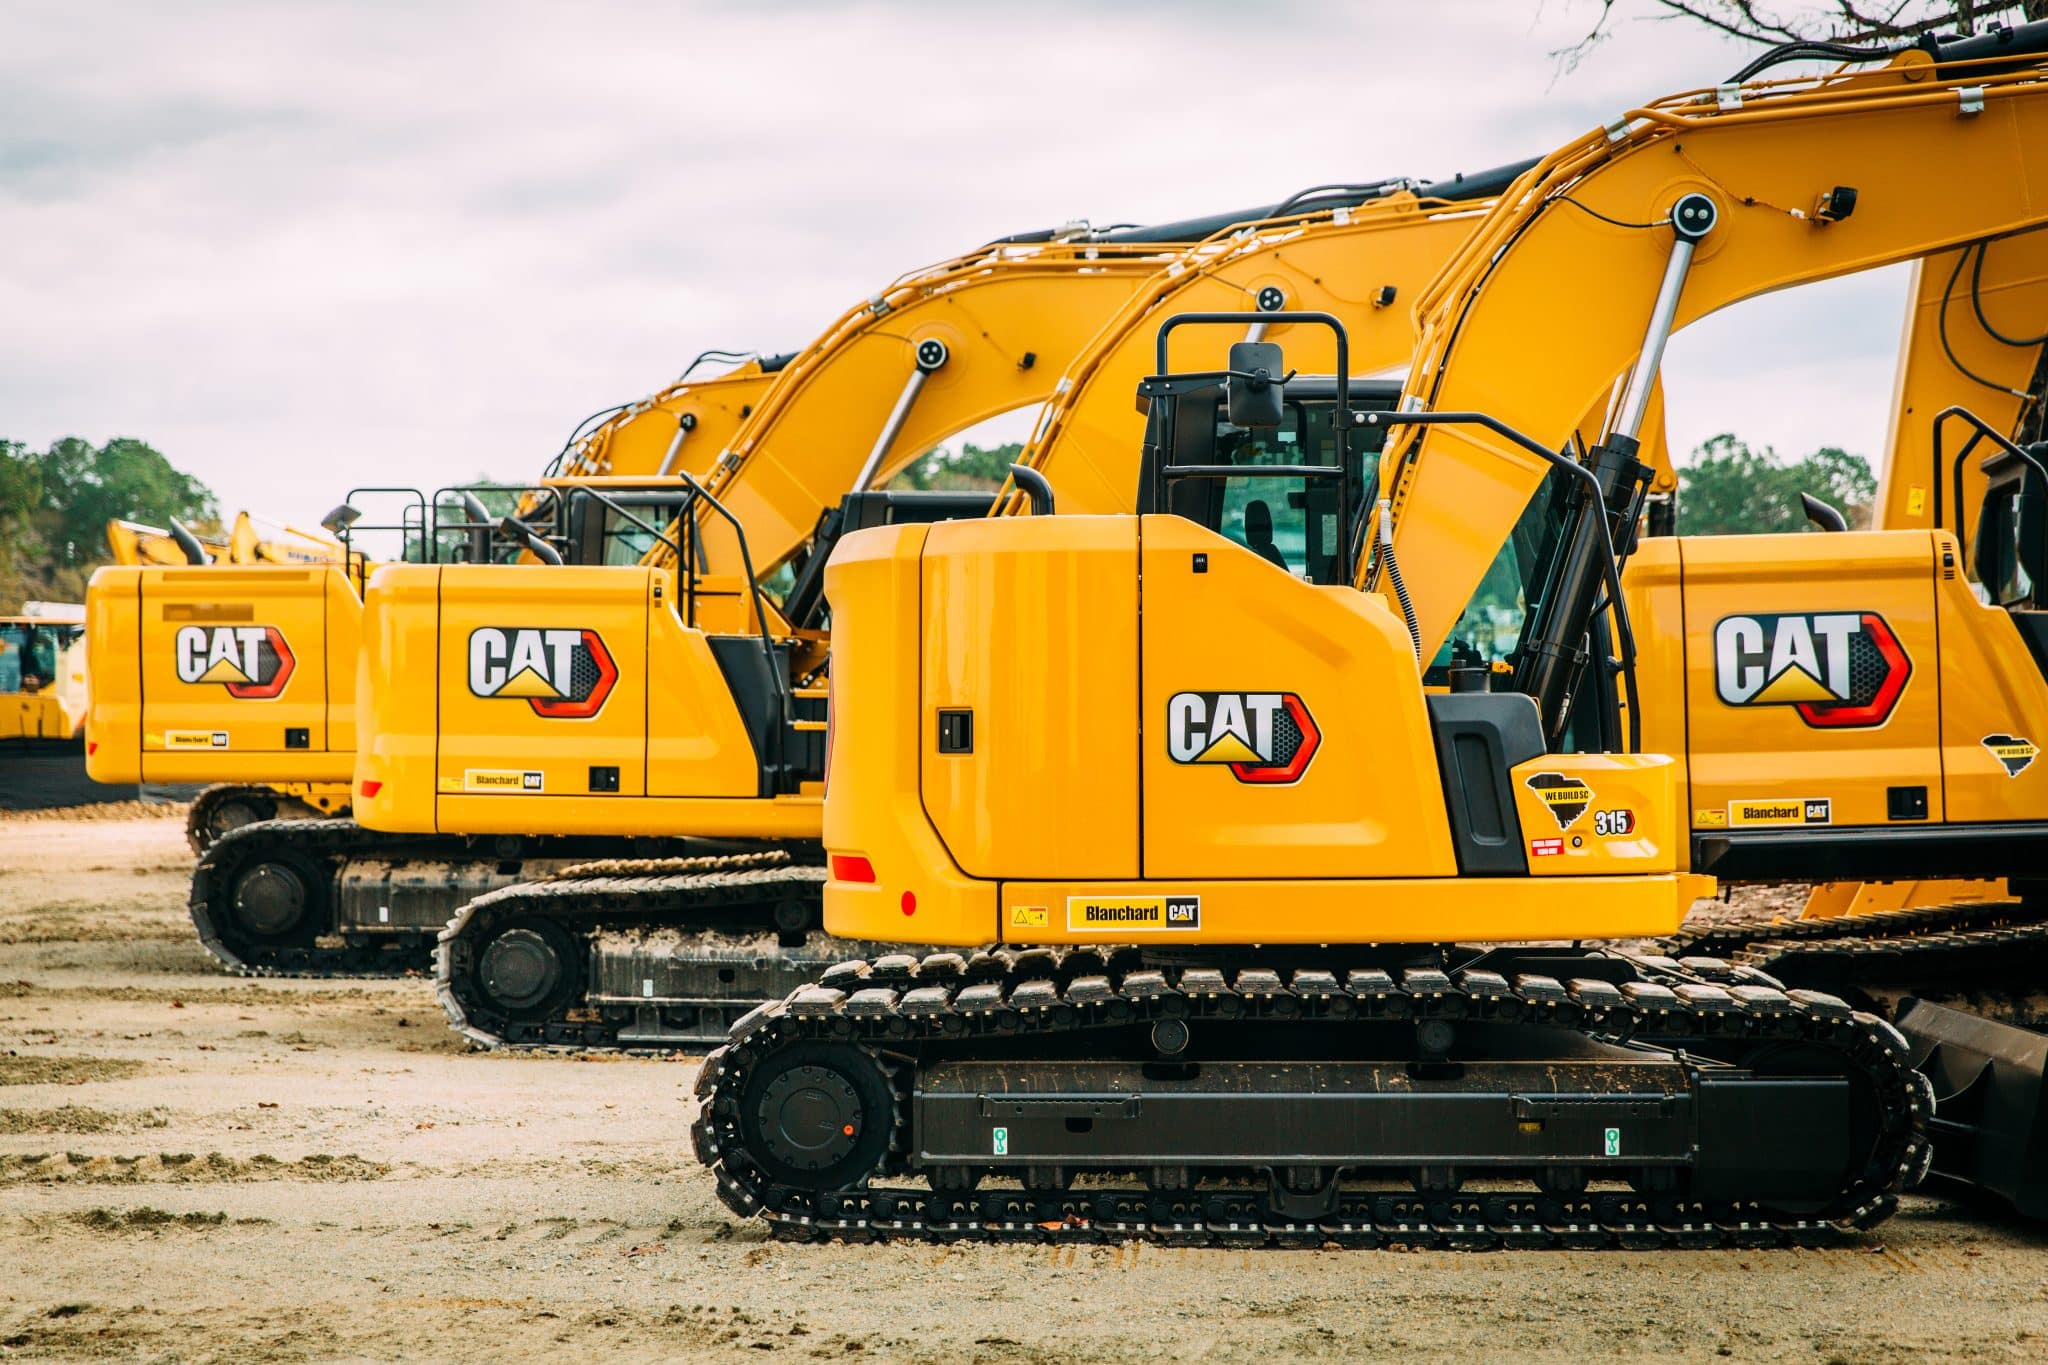 Massive Savings with Our Range of Excavators – Flexible Financing Available for All Sizes!